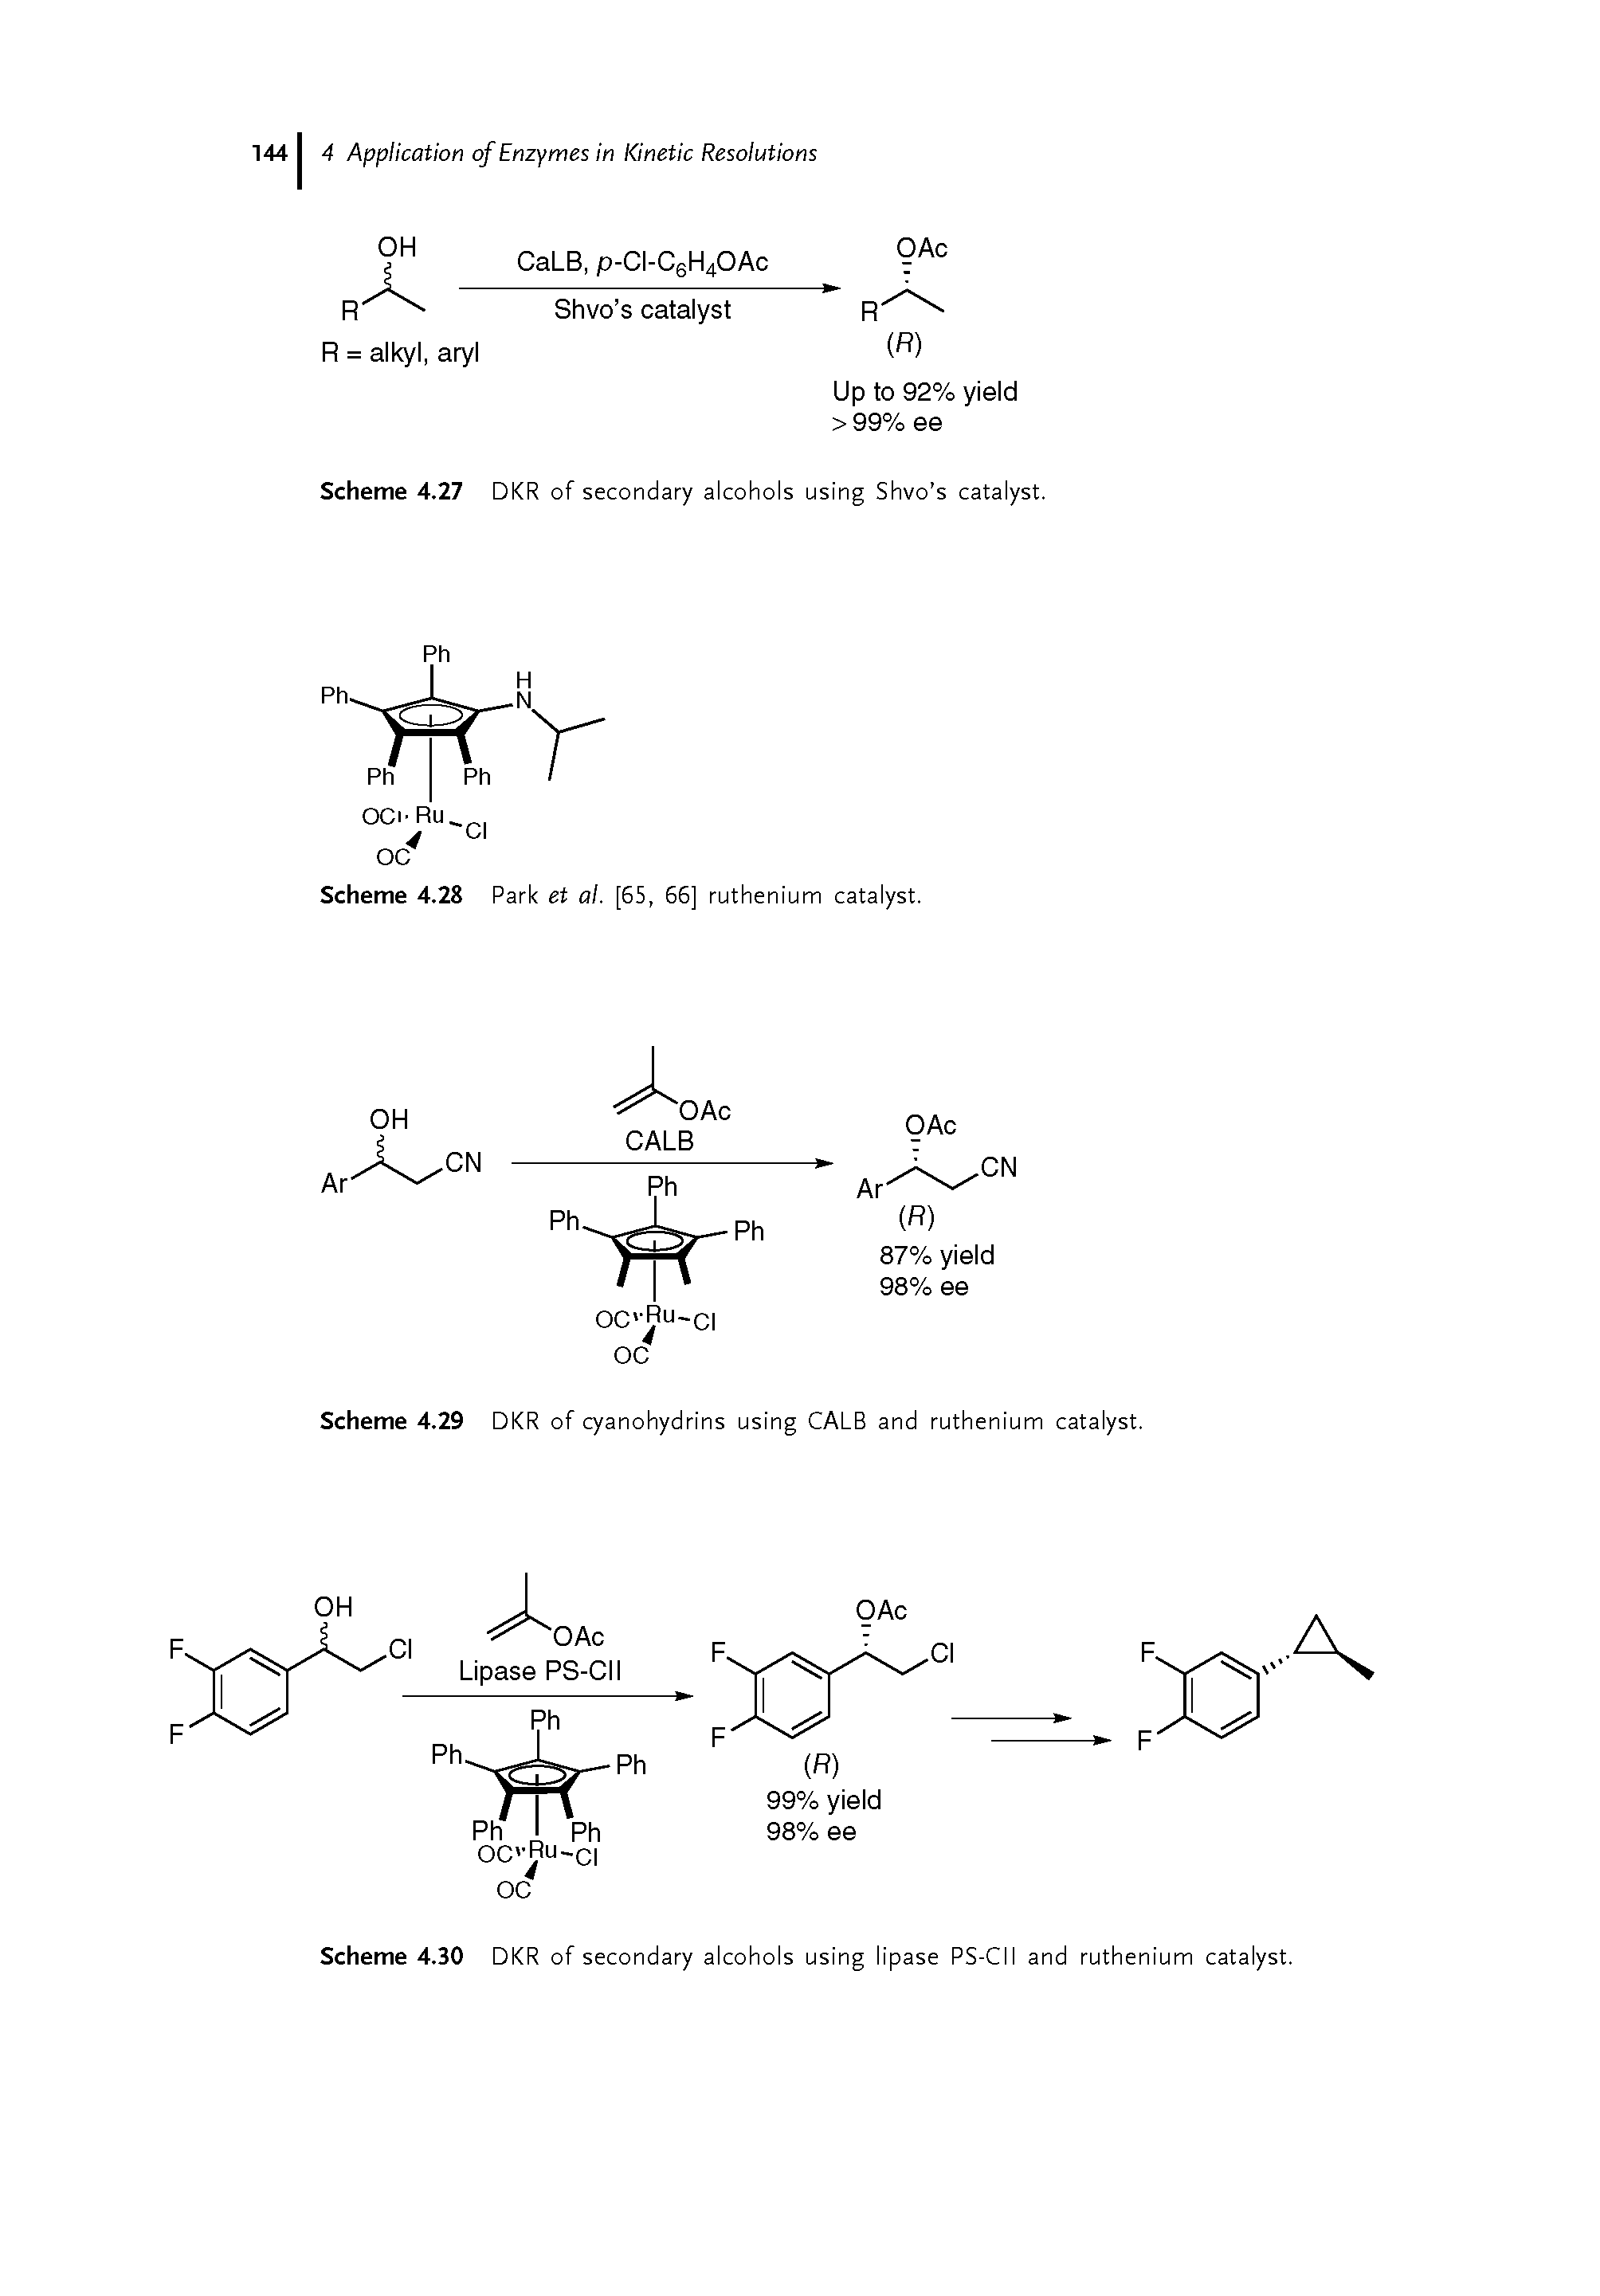 Scheme 4.29 DKR of cyanohydrins using CALB and ruthenium catalyst.